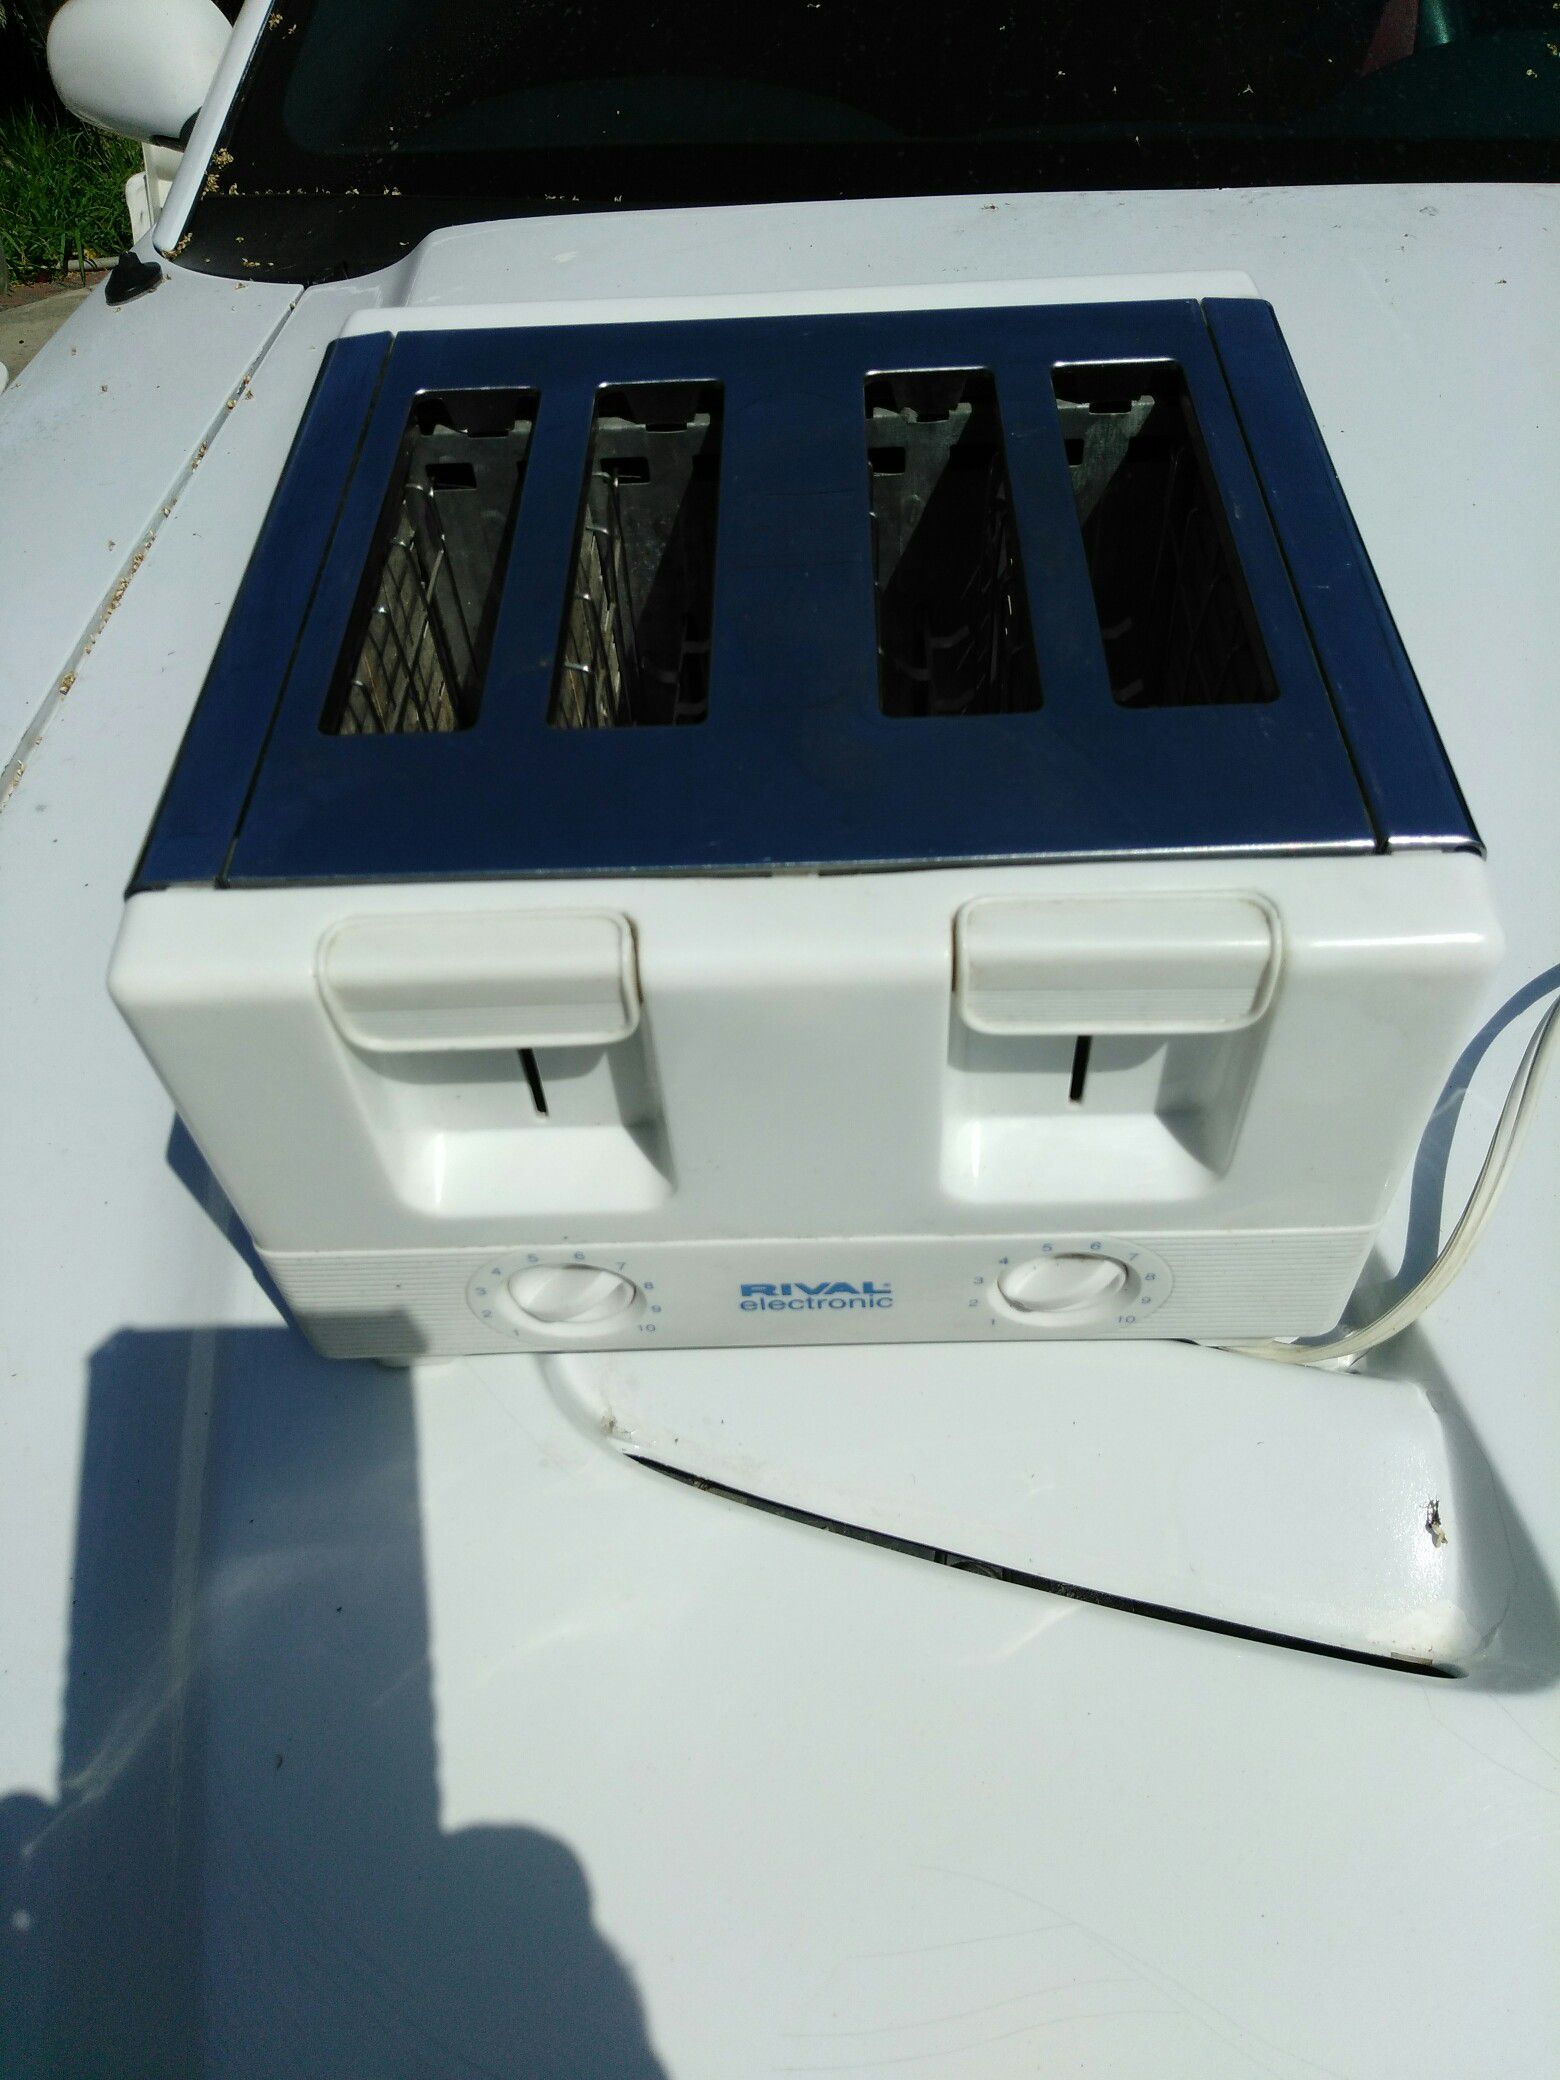 Rival electronic toaster